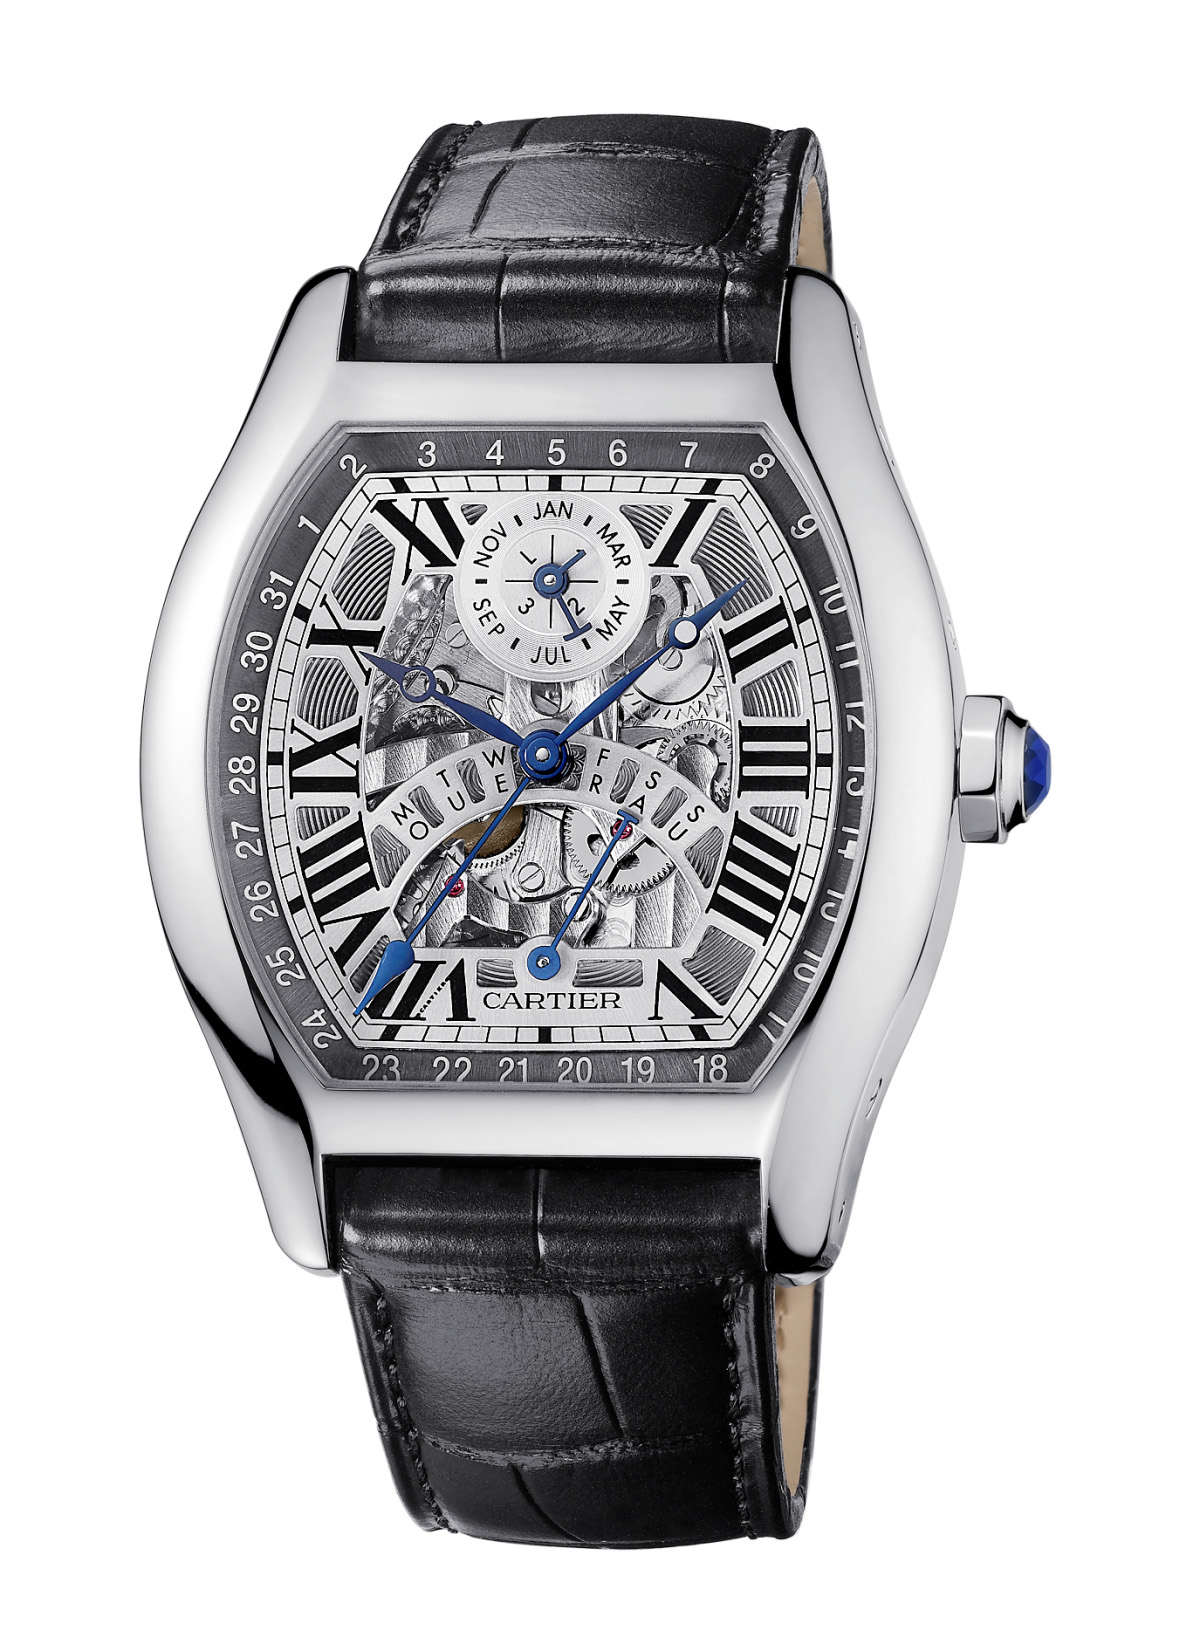 Vintage Eye for the Modern Guy: Cartier Tortue | WatchTime - USA's No.1 ...